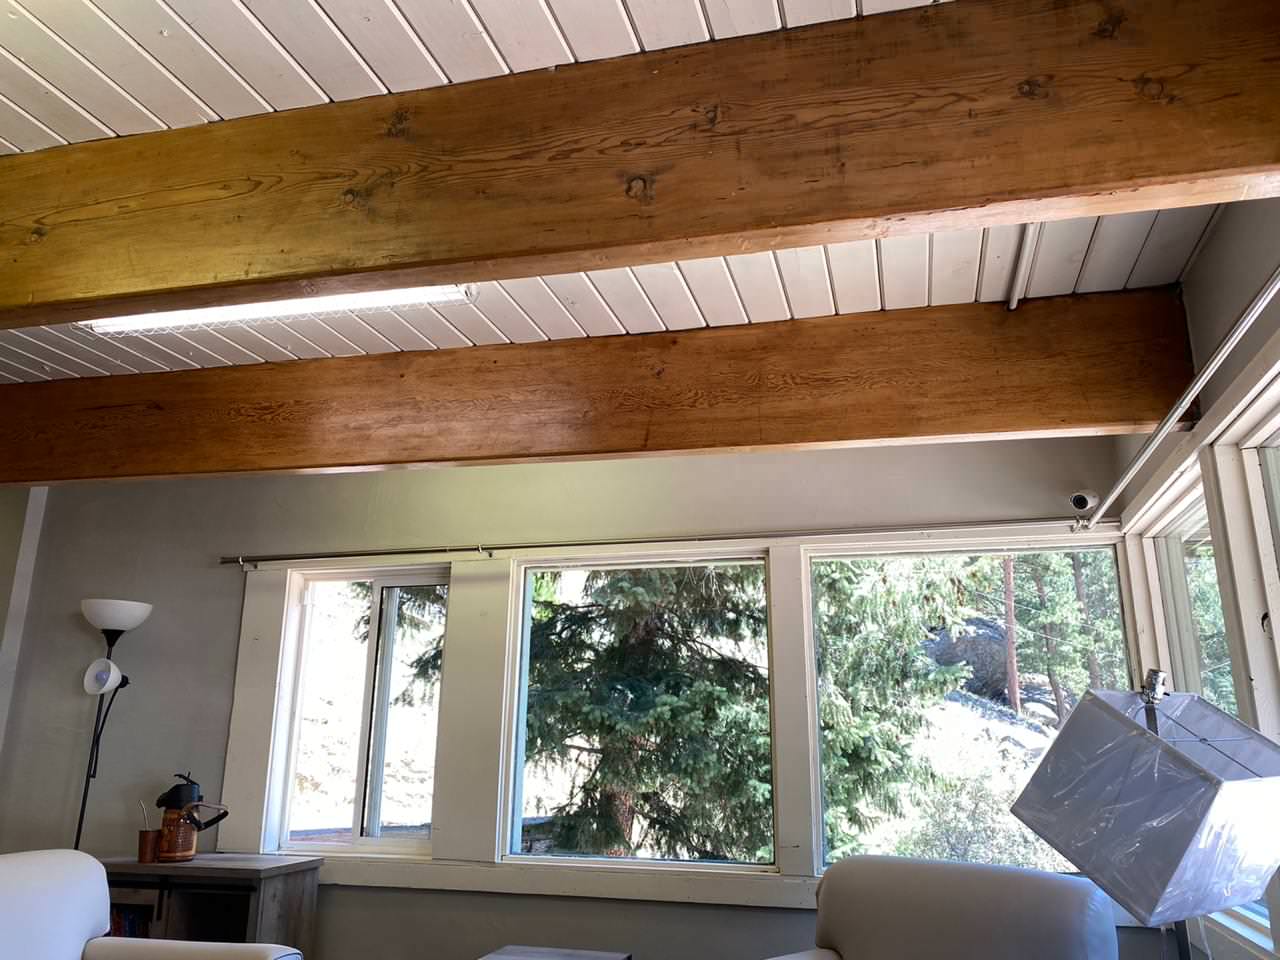 Poly beams and ceiling color change